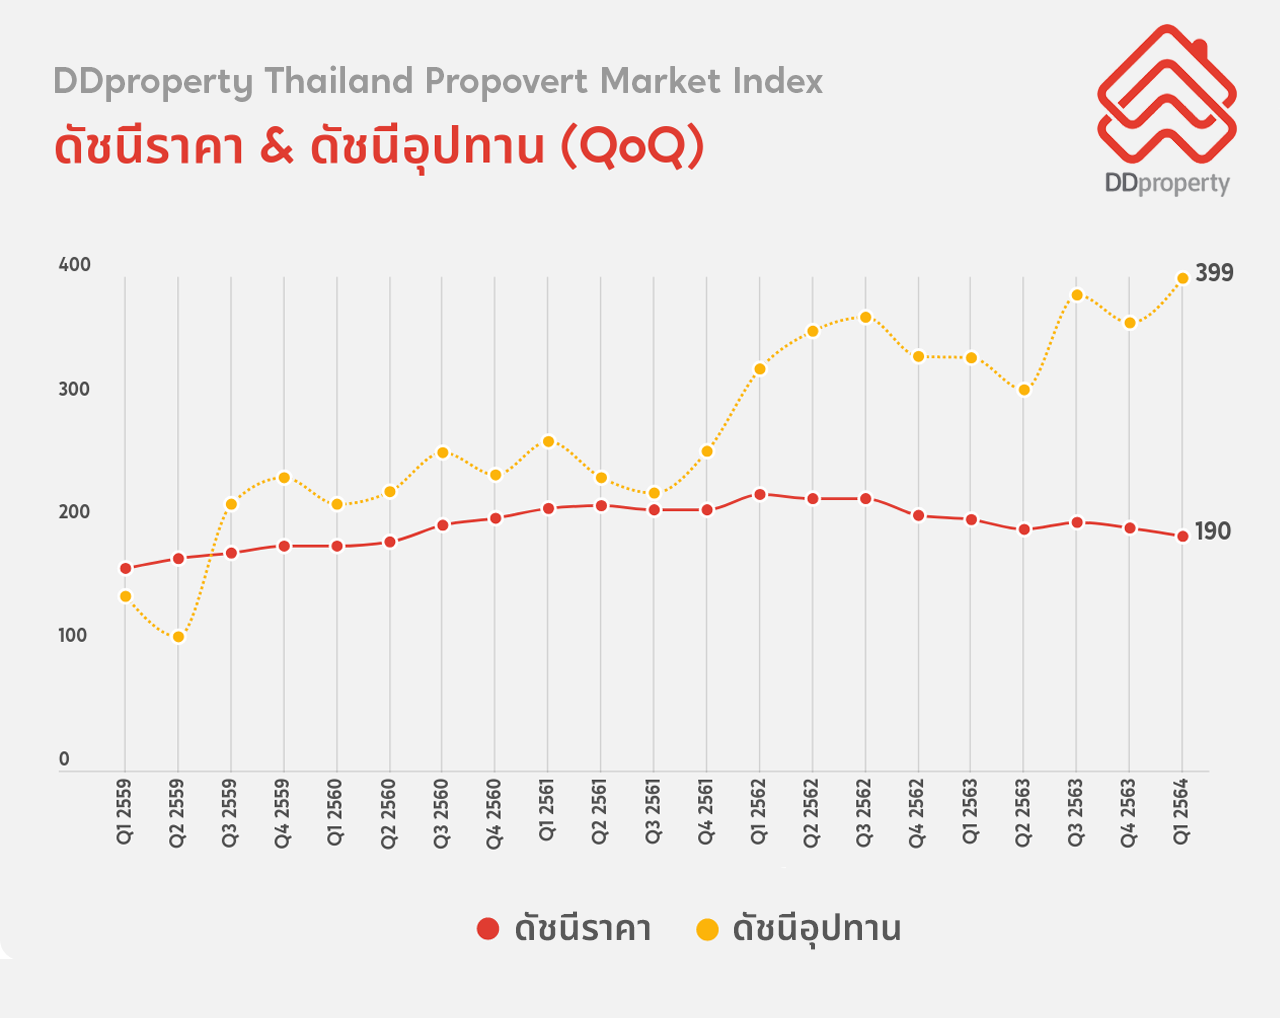 DDproperty Price Index and Supply Index PMI Q2 2021